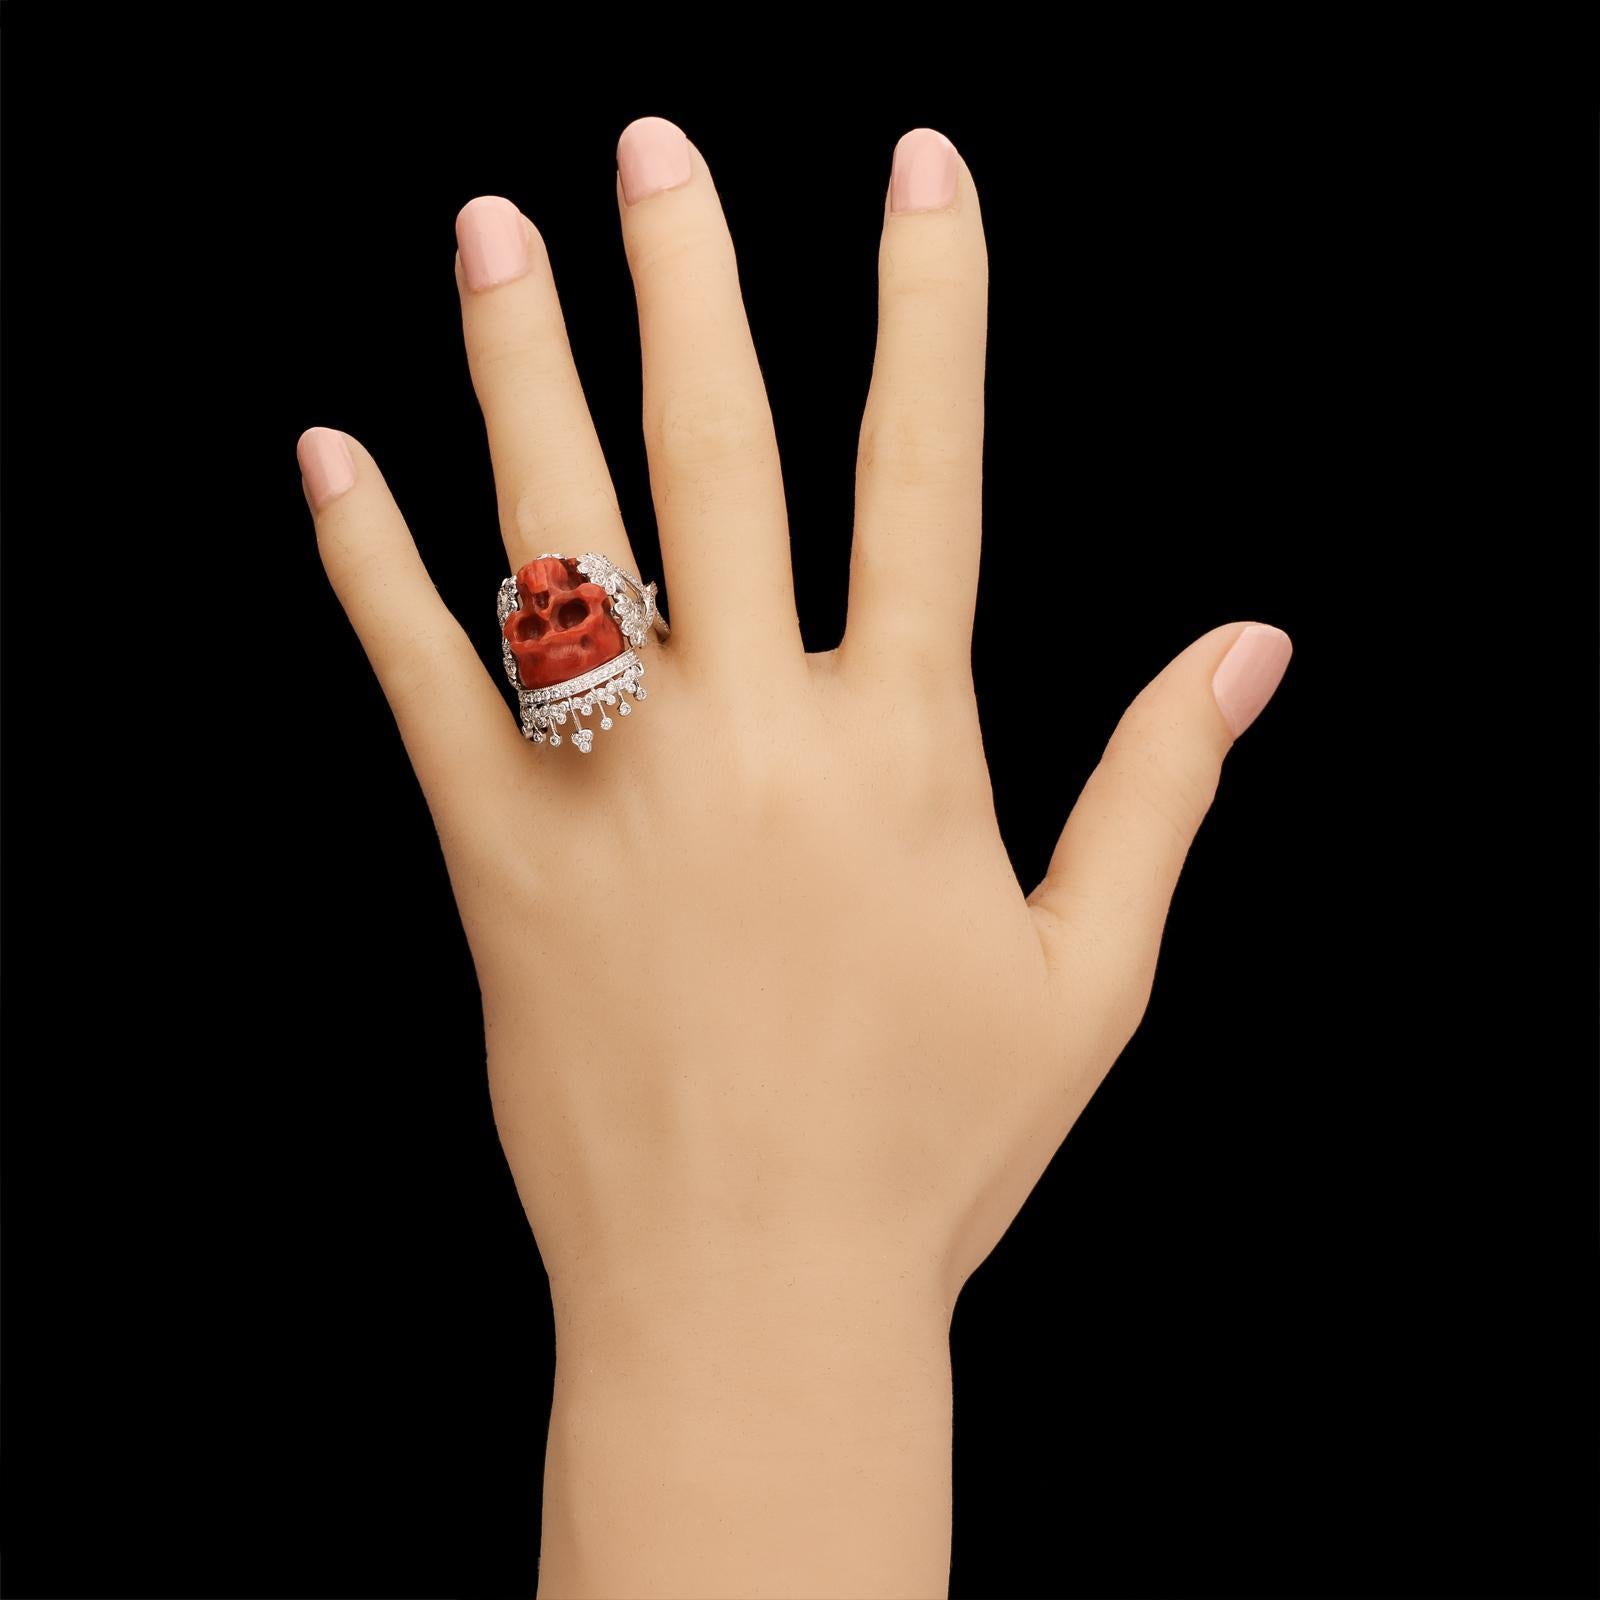 Brilliant Cut Fantastical Diamond and Coral Skull Ring by Lydia Courteille